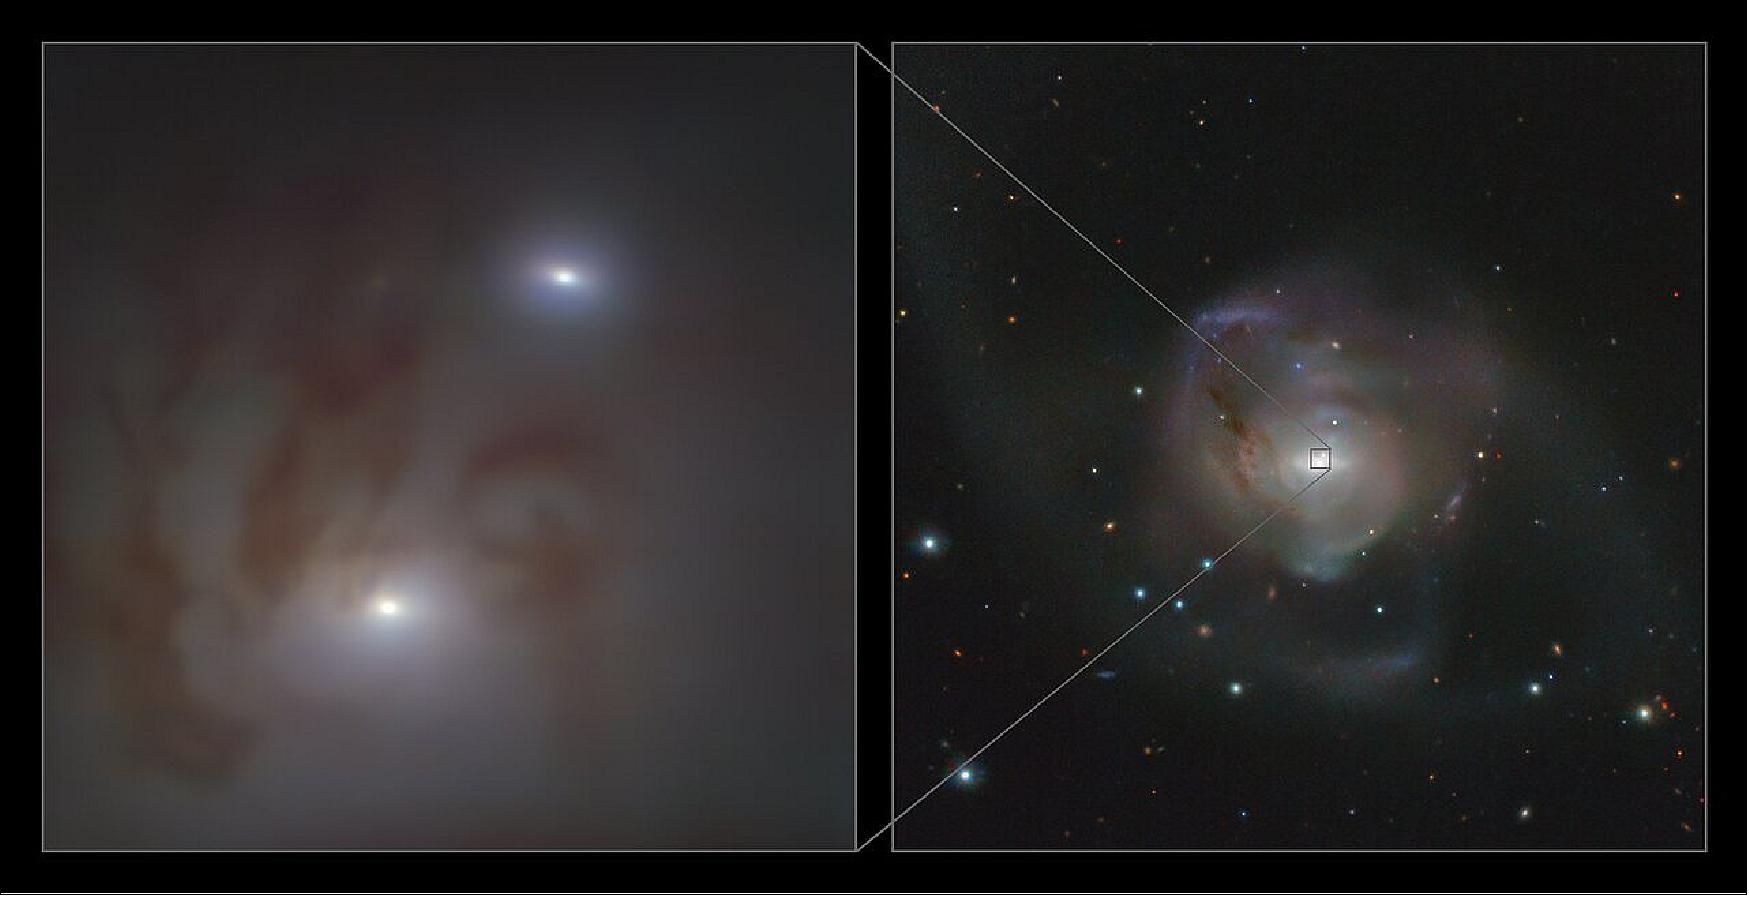 Figure 13: This image shows close-up (left) and wide (right) views of the two bright galactic nuclei, each housing a supermassive black hole, in NGC 7727, a galaxy located 89 million light-years away from Earth in the constellation Aquarius. Each nucleus consists of a dense group of stars with a supermassive black hole at its center. The two black holes are on a collision course and form the closest pair of supermassive black holes found to date. It is also the pair with the smallest separation between two supermassive black holes found to date — observed to be just 1600 light-years apart in the sky. — The image on the left was taken with the MUSE instrument on ESO’s Very Large Telescope (VLT) at the Paranal Observatory in Chile while the one on the right was taken with ESO's VLT Survey Telescope (image credit: ESO/Voggel et al.; ESO/VST ATLAS team. Acknowledgement: Durham University/CASU/WFAU)